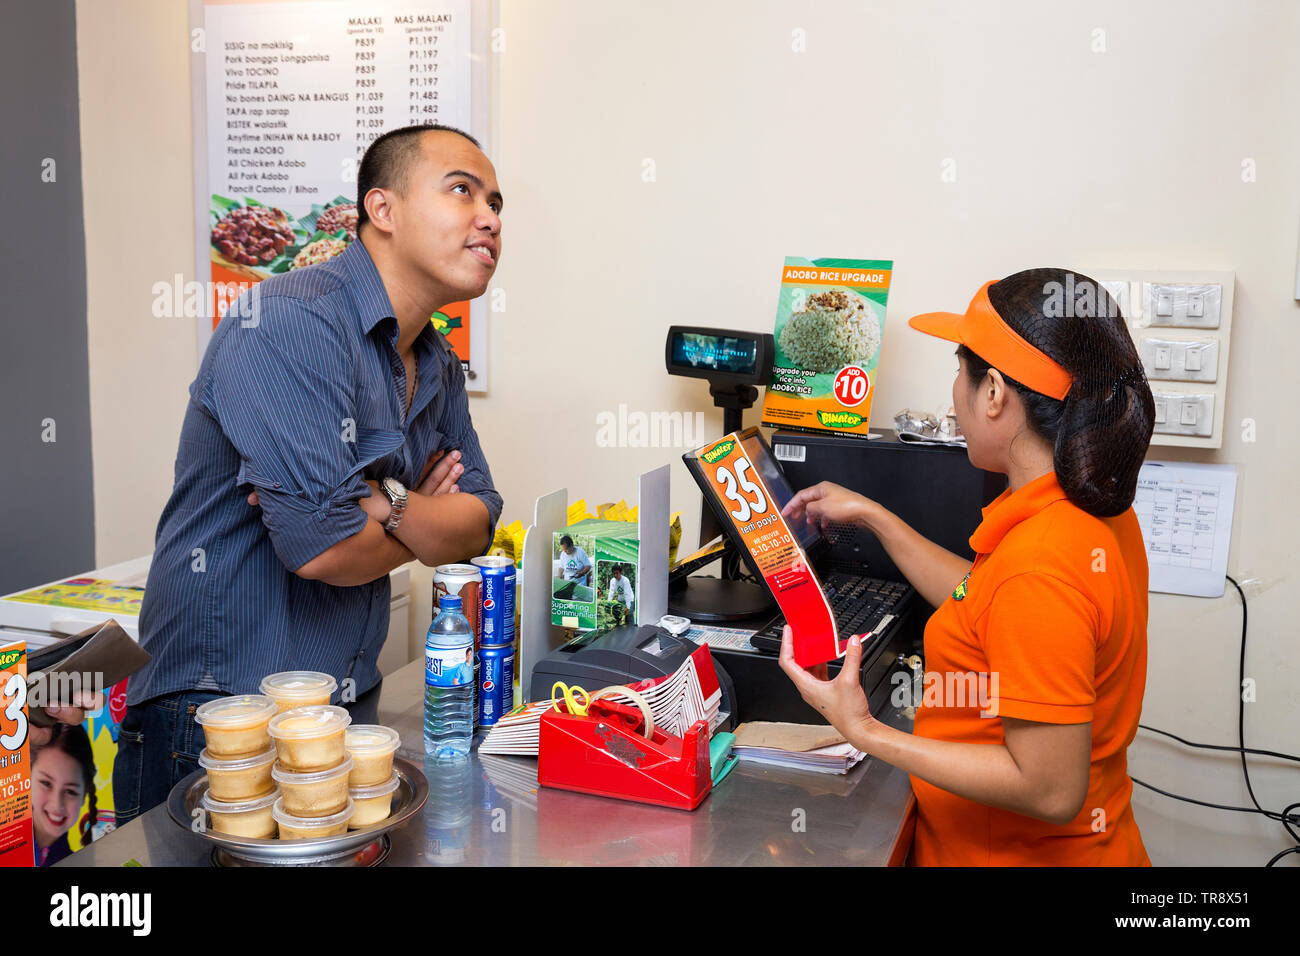 Manila, Philippines - July 26, 2016: A customer ordering food at the cashier in a filipino reastaurant Stock Photo